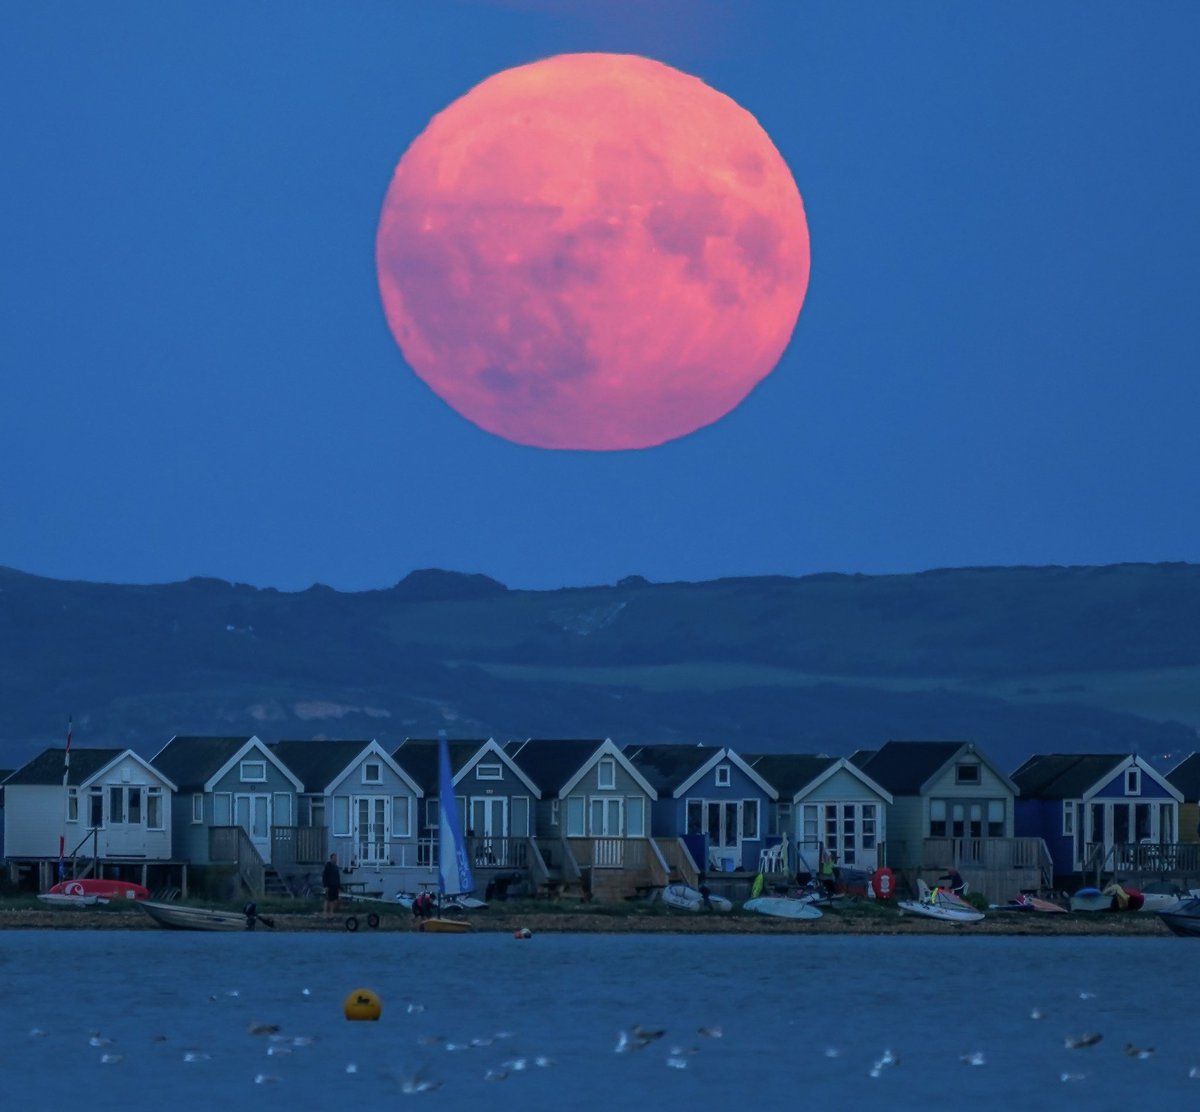 The Blue Super Moon this evening over Mudeford Spit #bluemoon #supermoon #moon @StormHour